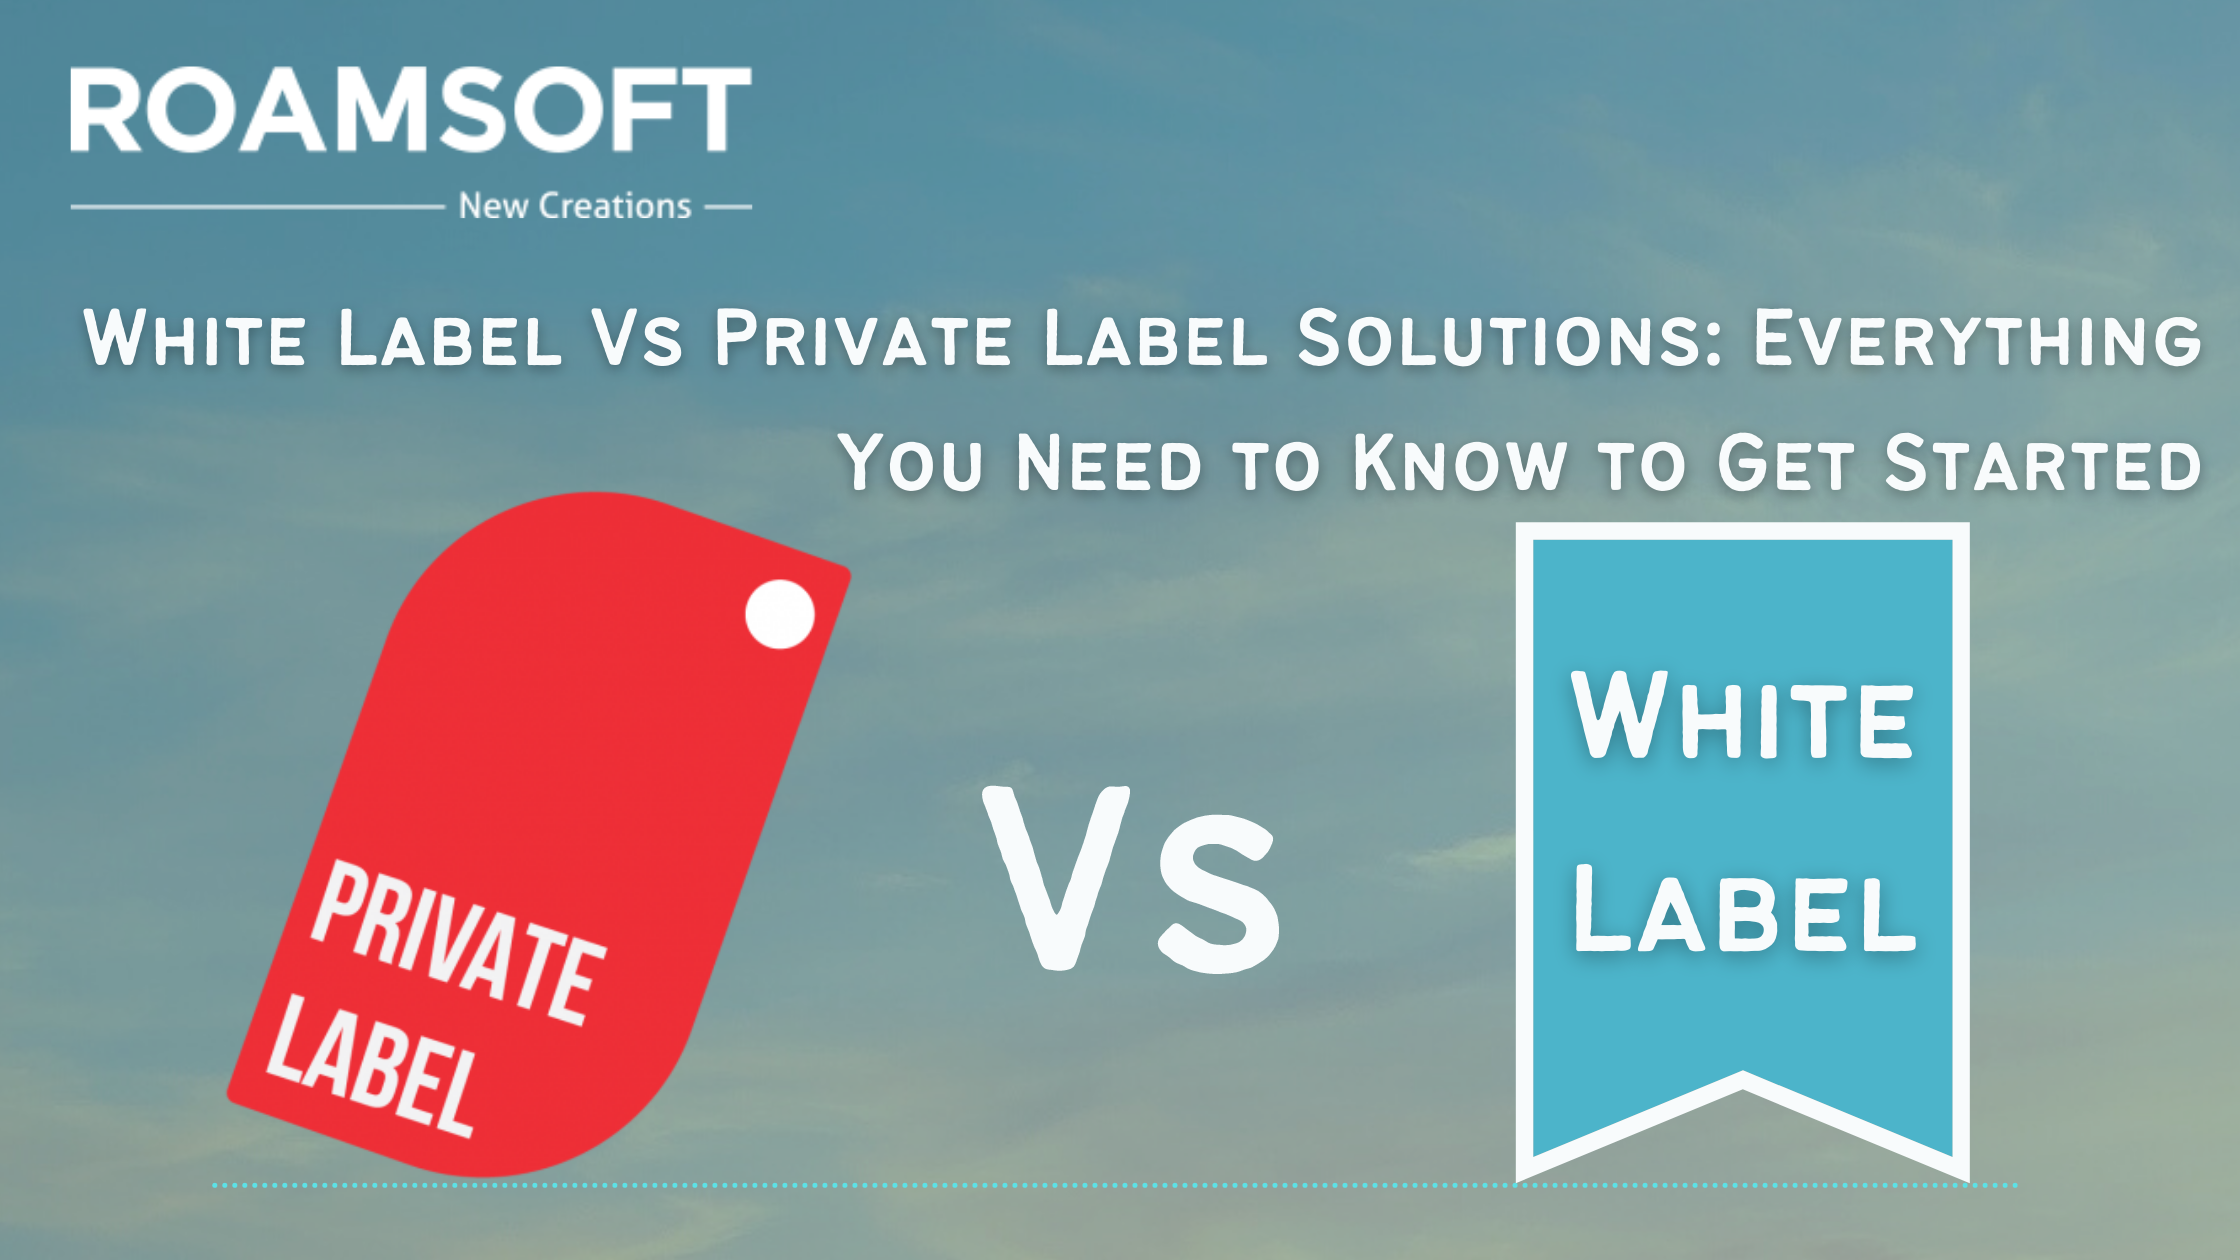 White Label Vs Private Label Solutions: Everything You Need to Know to Get Started